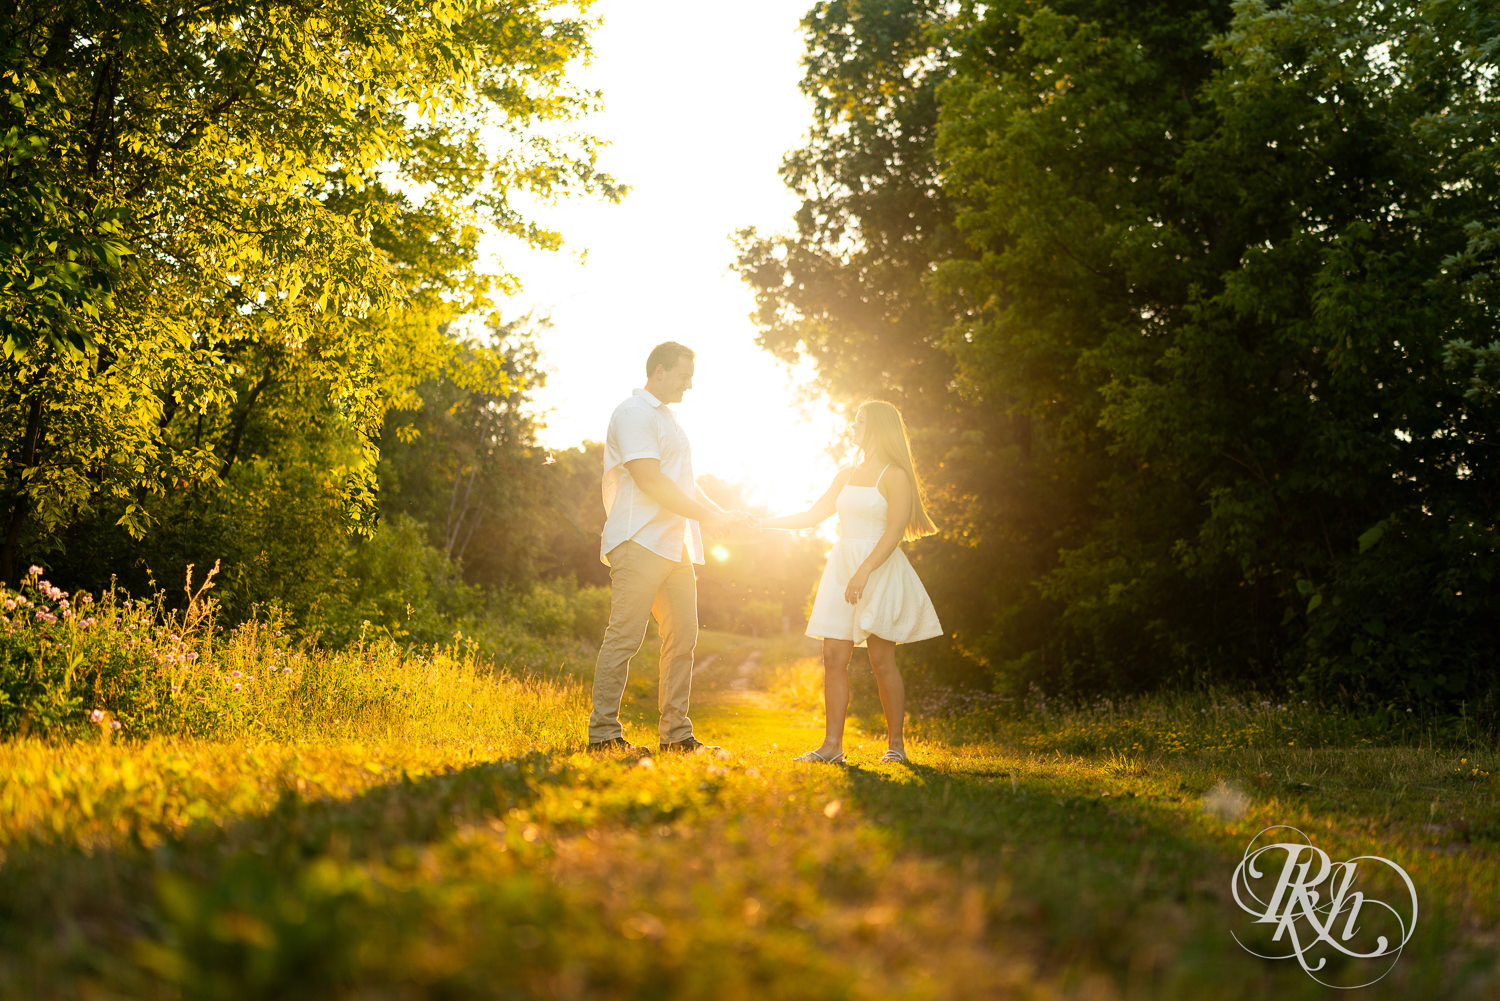 Man in white shirt and woman in white dress dance during golden hour engagement photography at Lebanon Hills in Eagan, Minnesota.